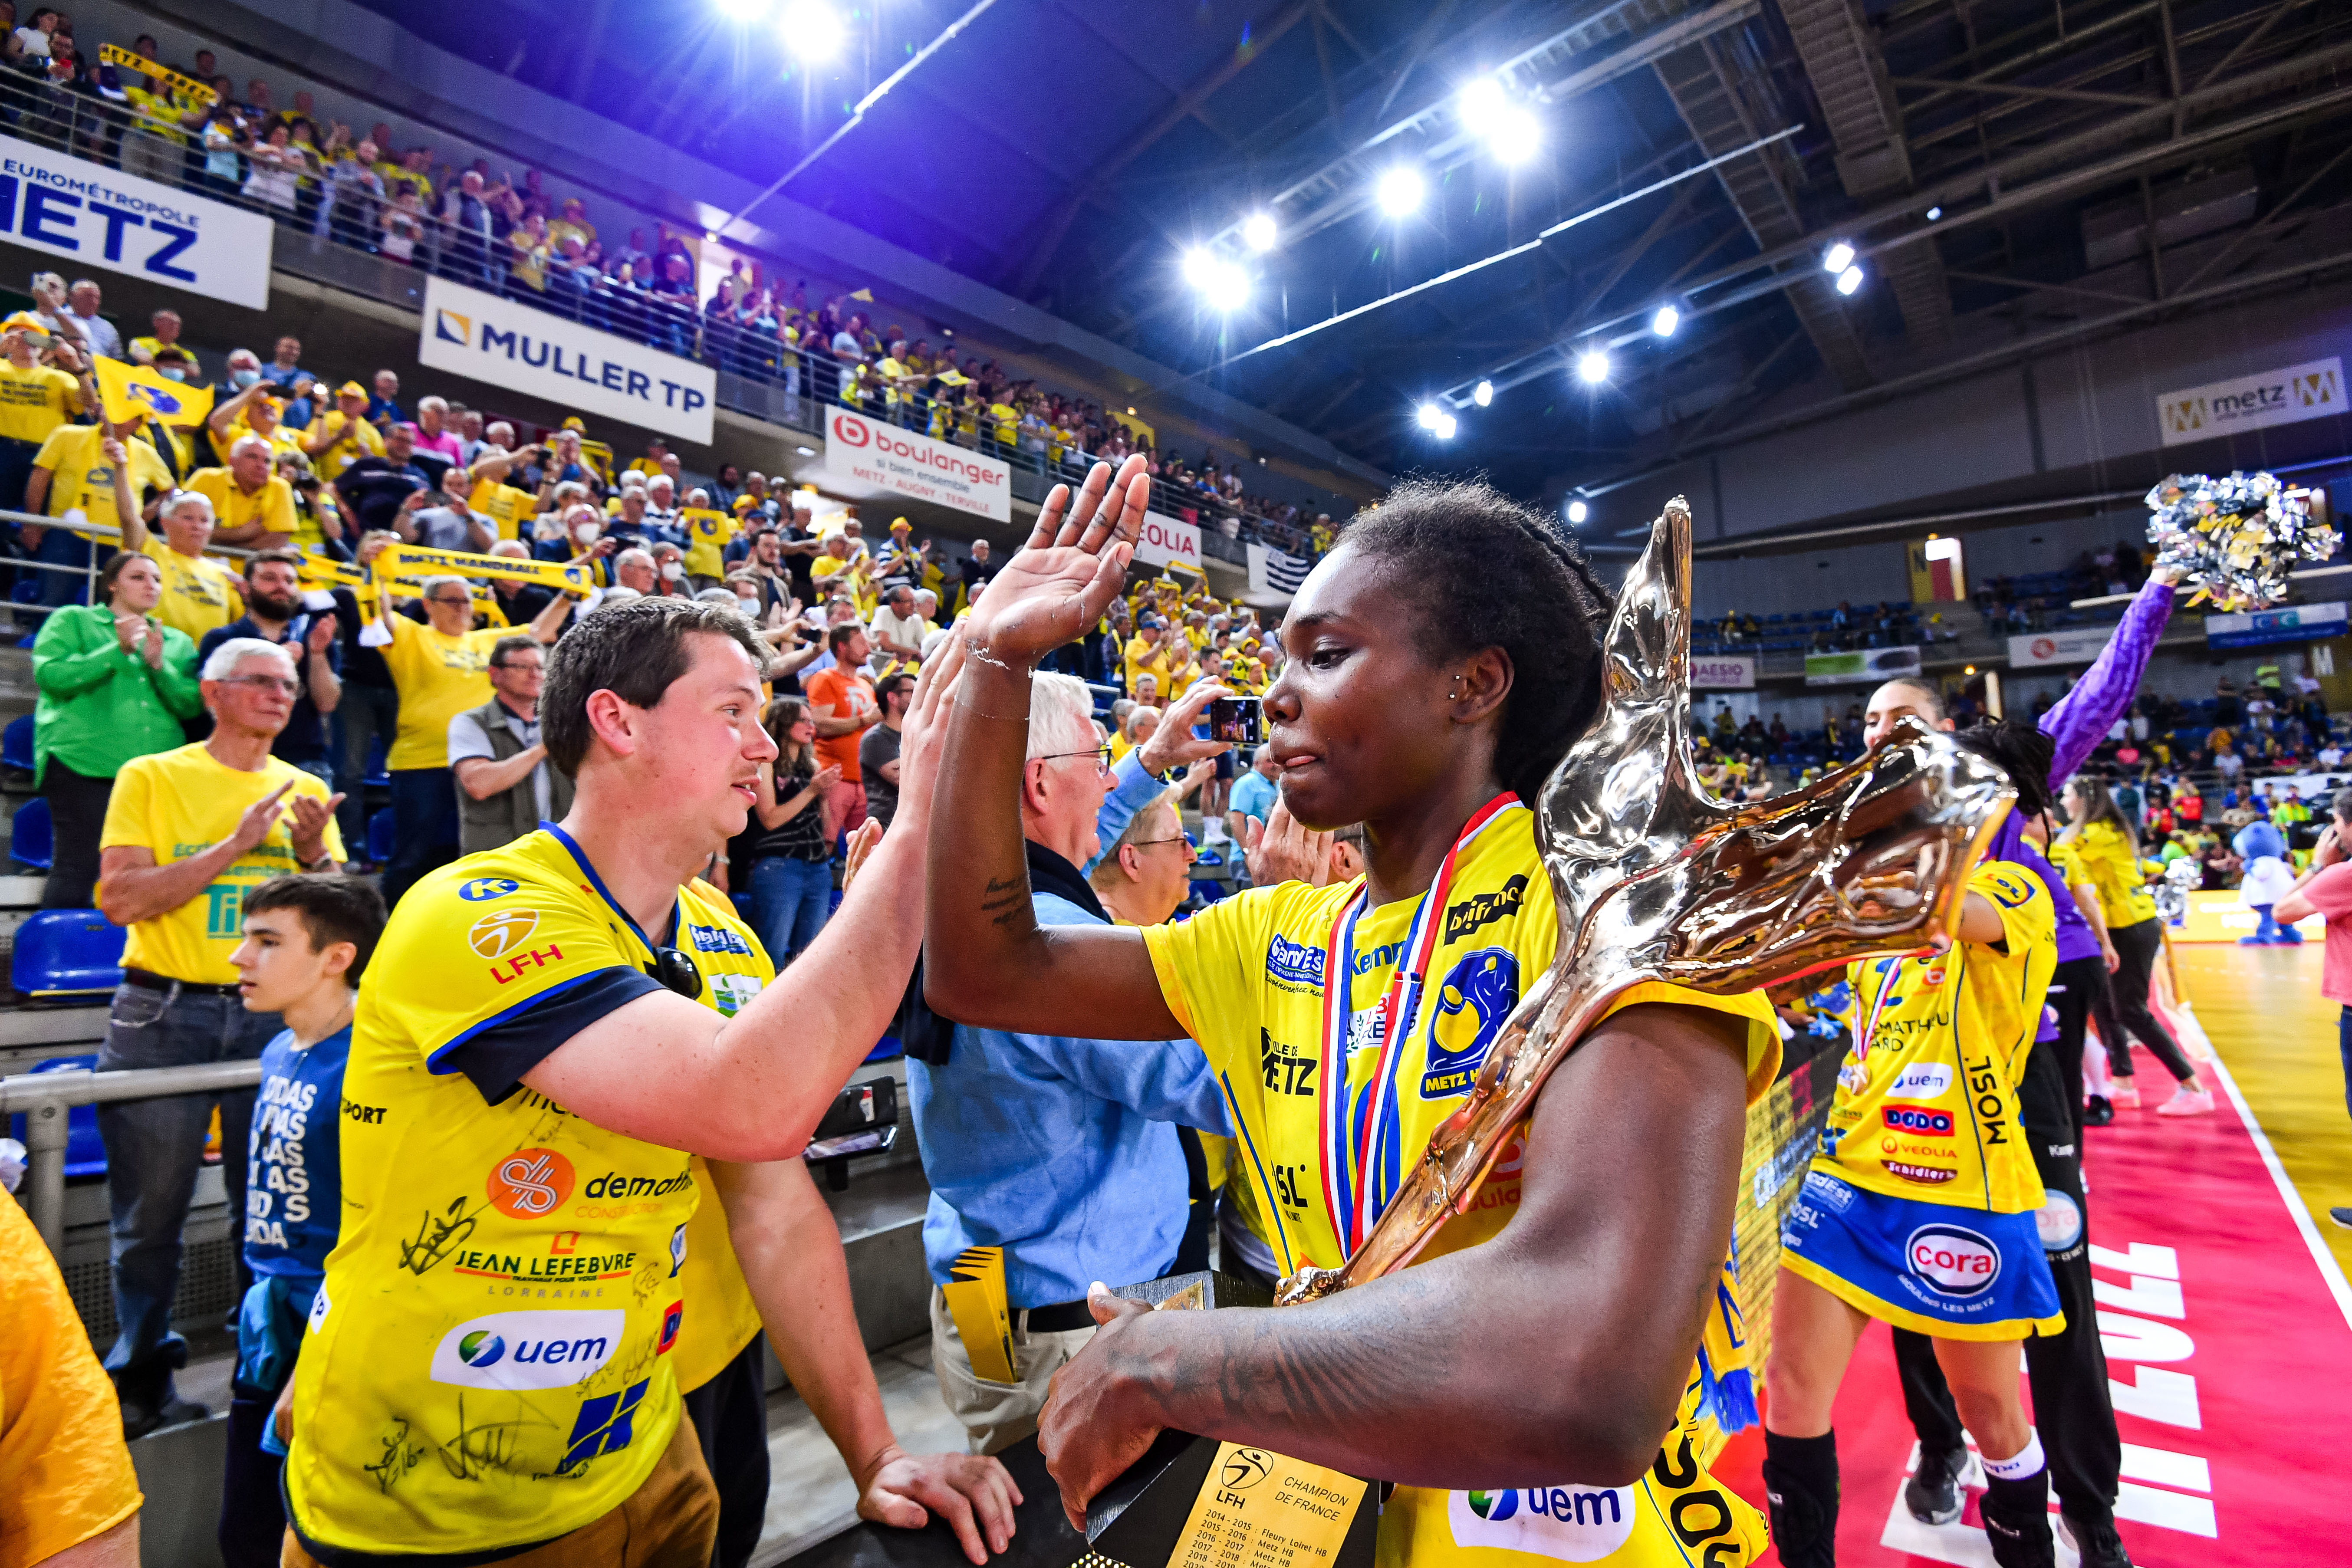 Meline NOCANDY of Metz present the trophy to the fans after the Final Ligue Butaguaz Energie match between Metz and Brest on May 29, 2022 in Metz, France. (Photo by Baptiste Fernandez/Icon Sport)